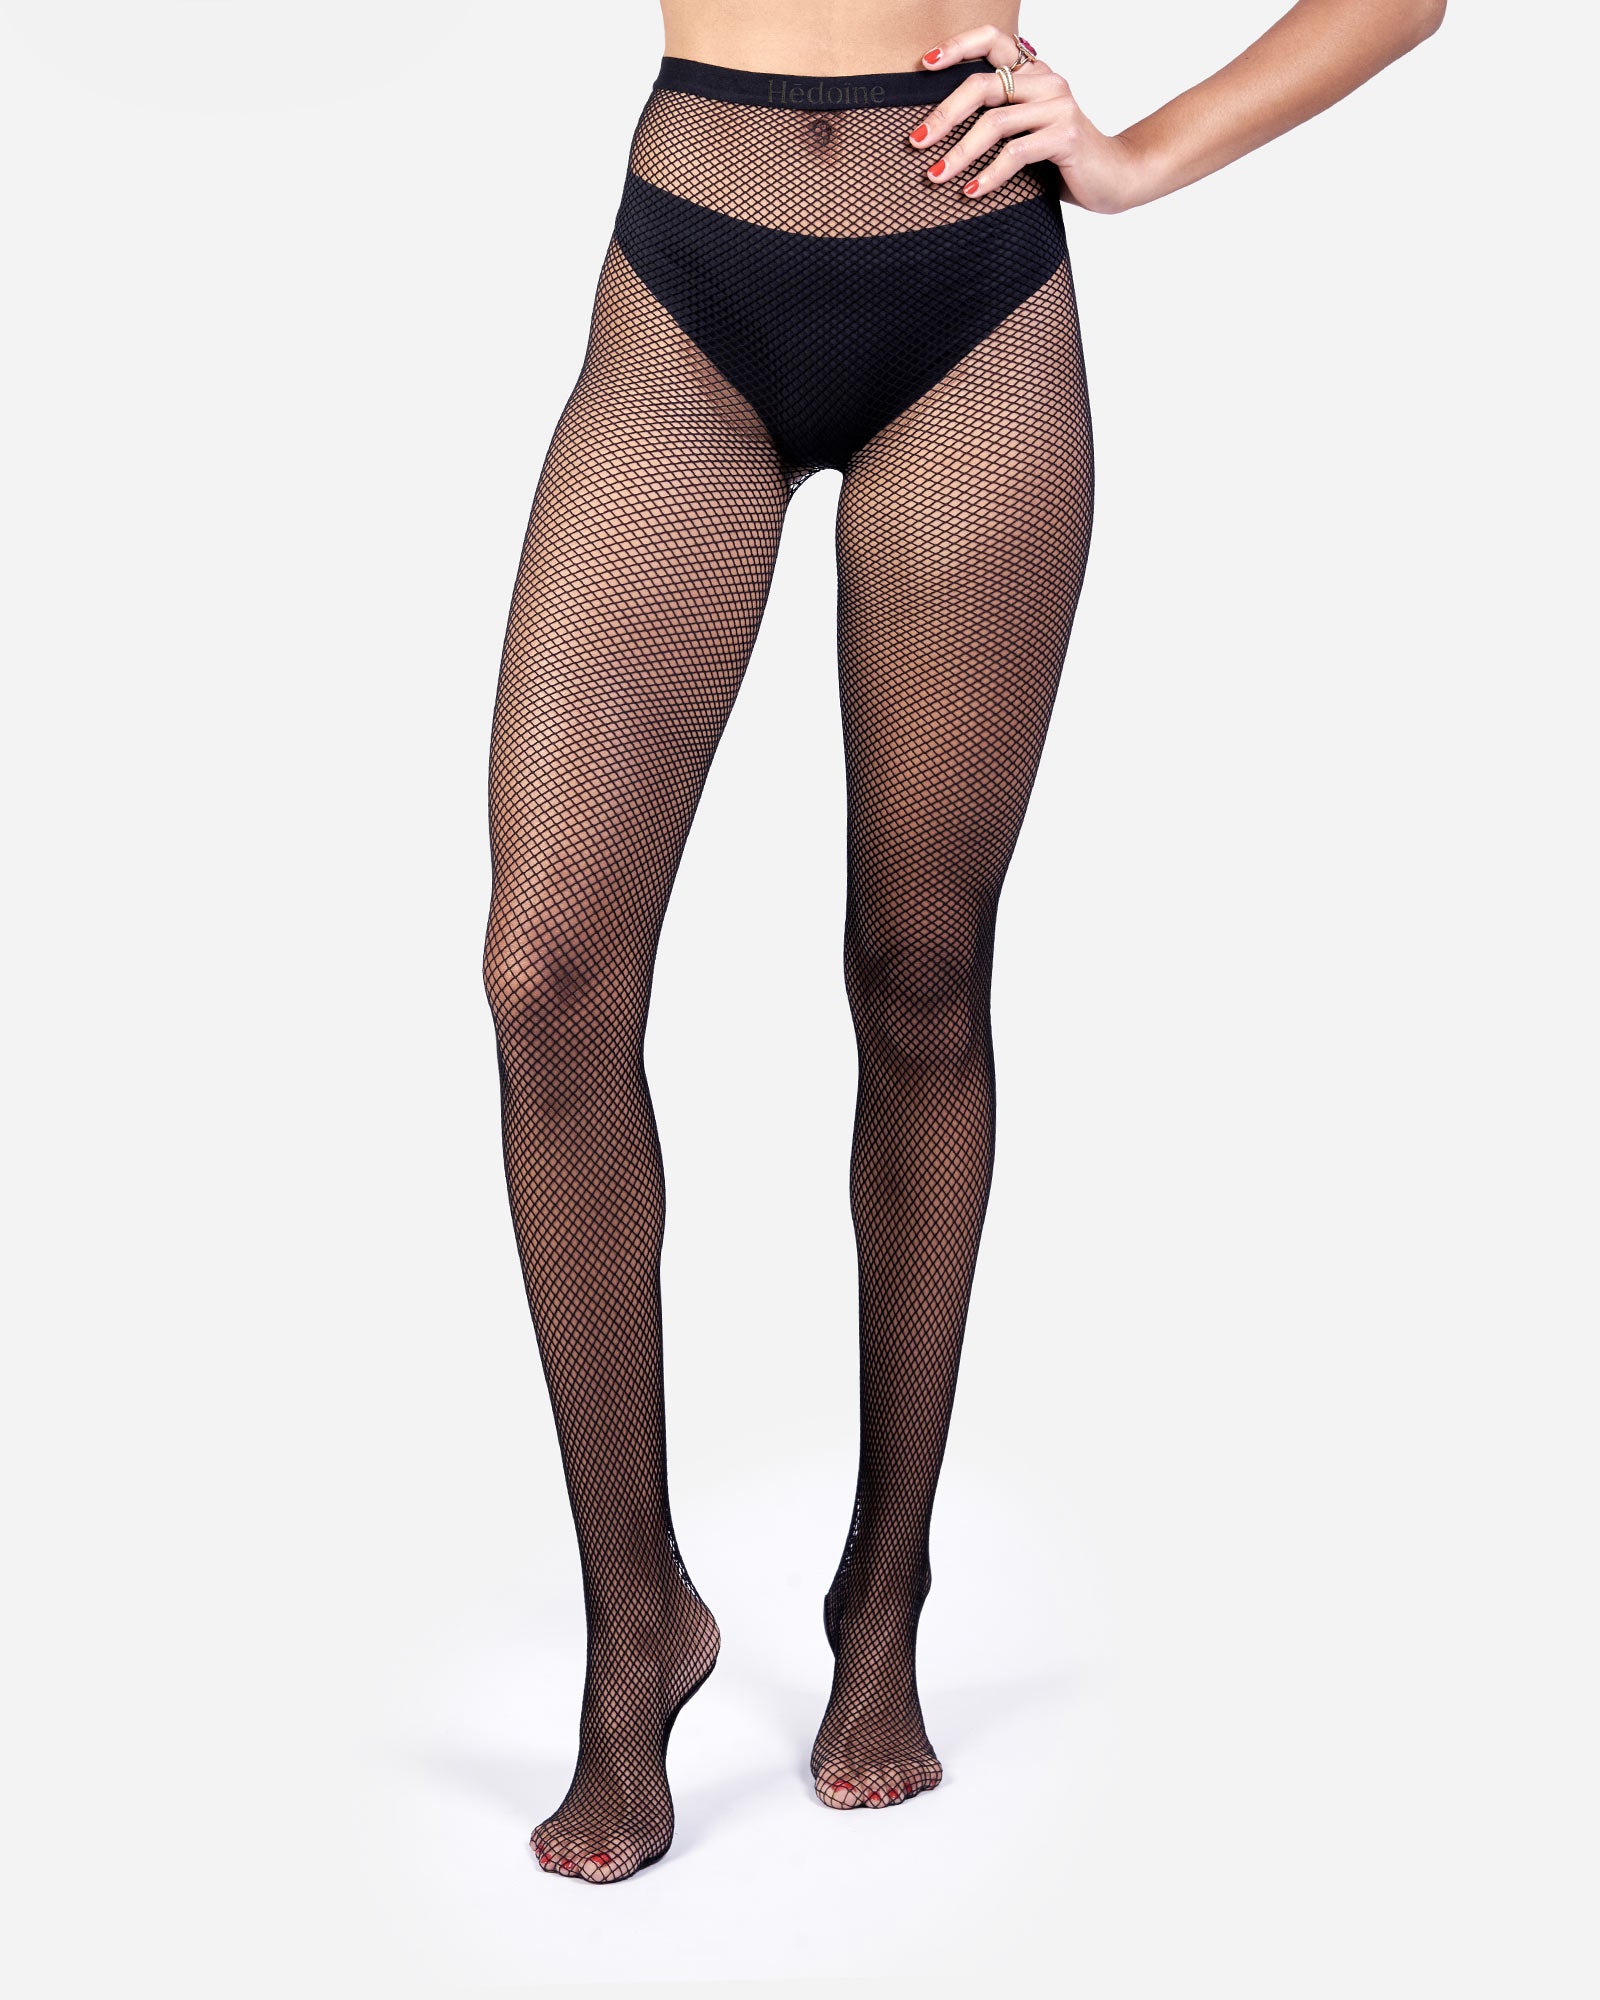 Black Tights  Responsibly crafted, seriously comfortable – Hēdoïne